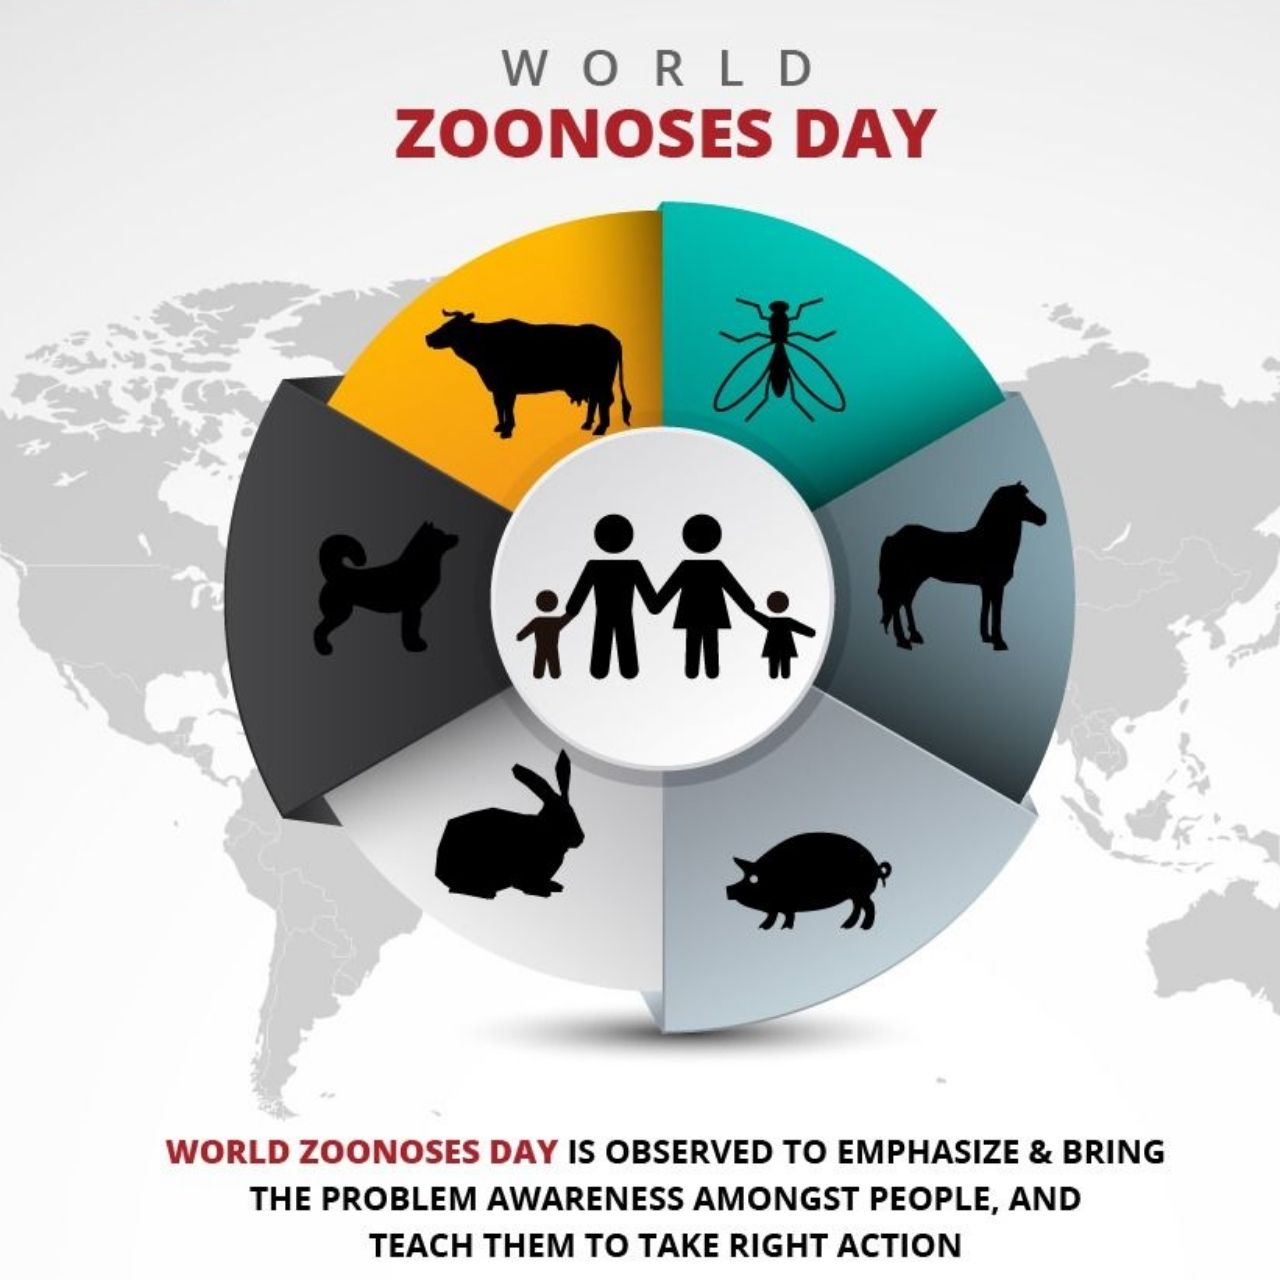 World Zoonoses Day 2021 History, Meaning, Significance and Celebration